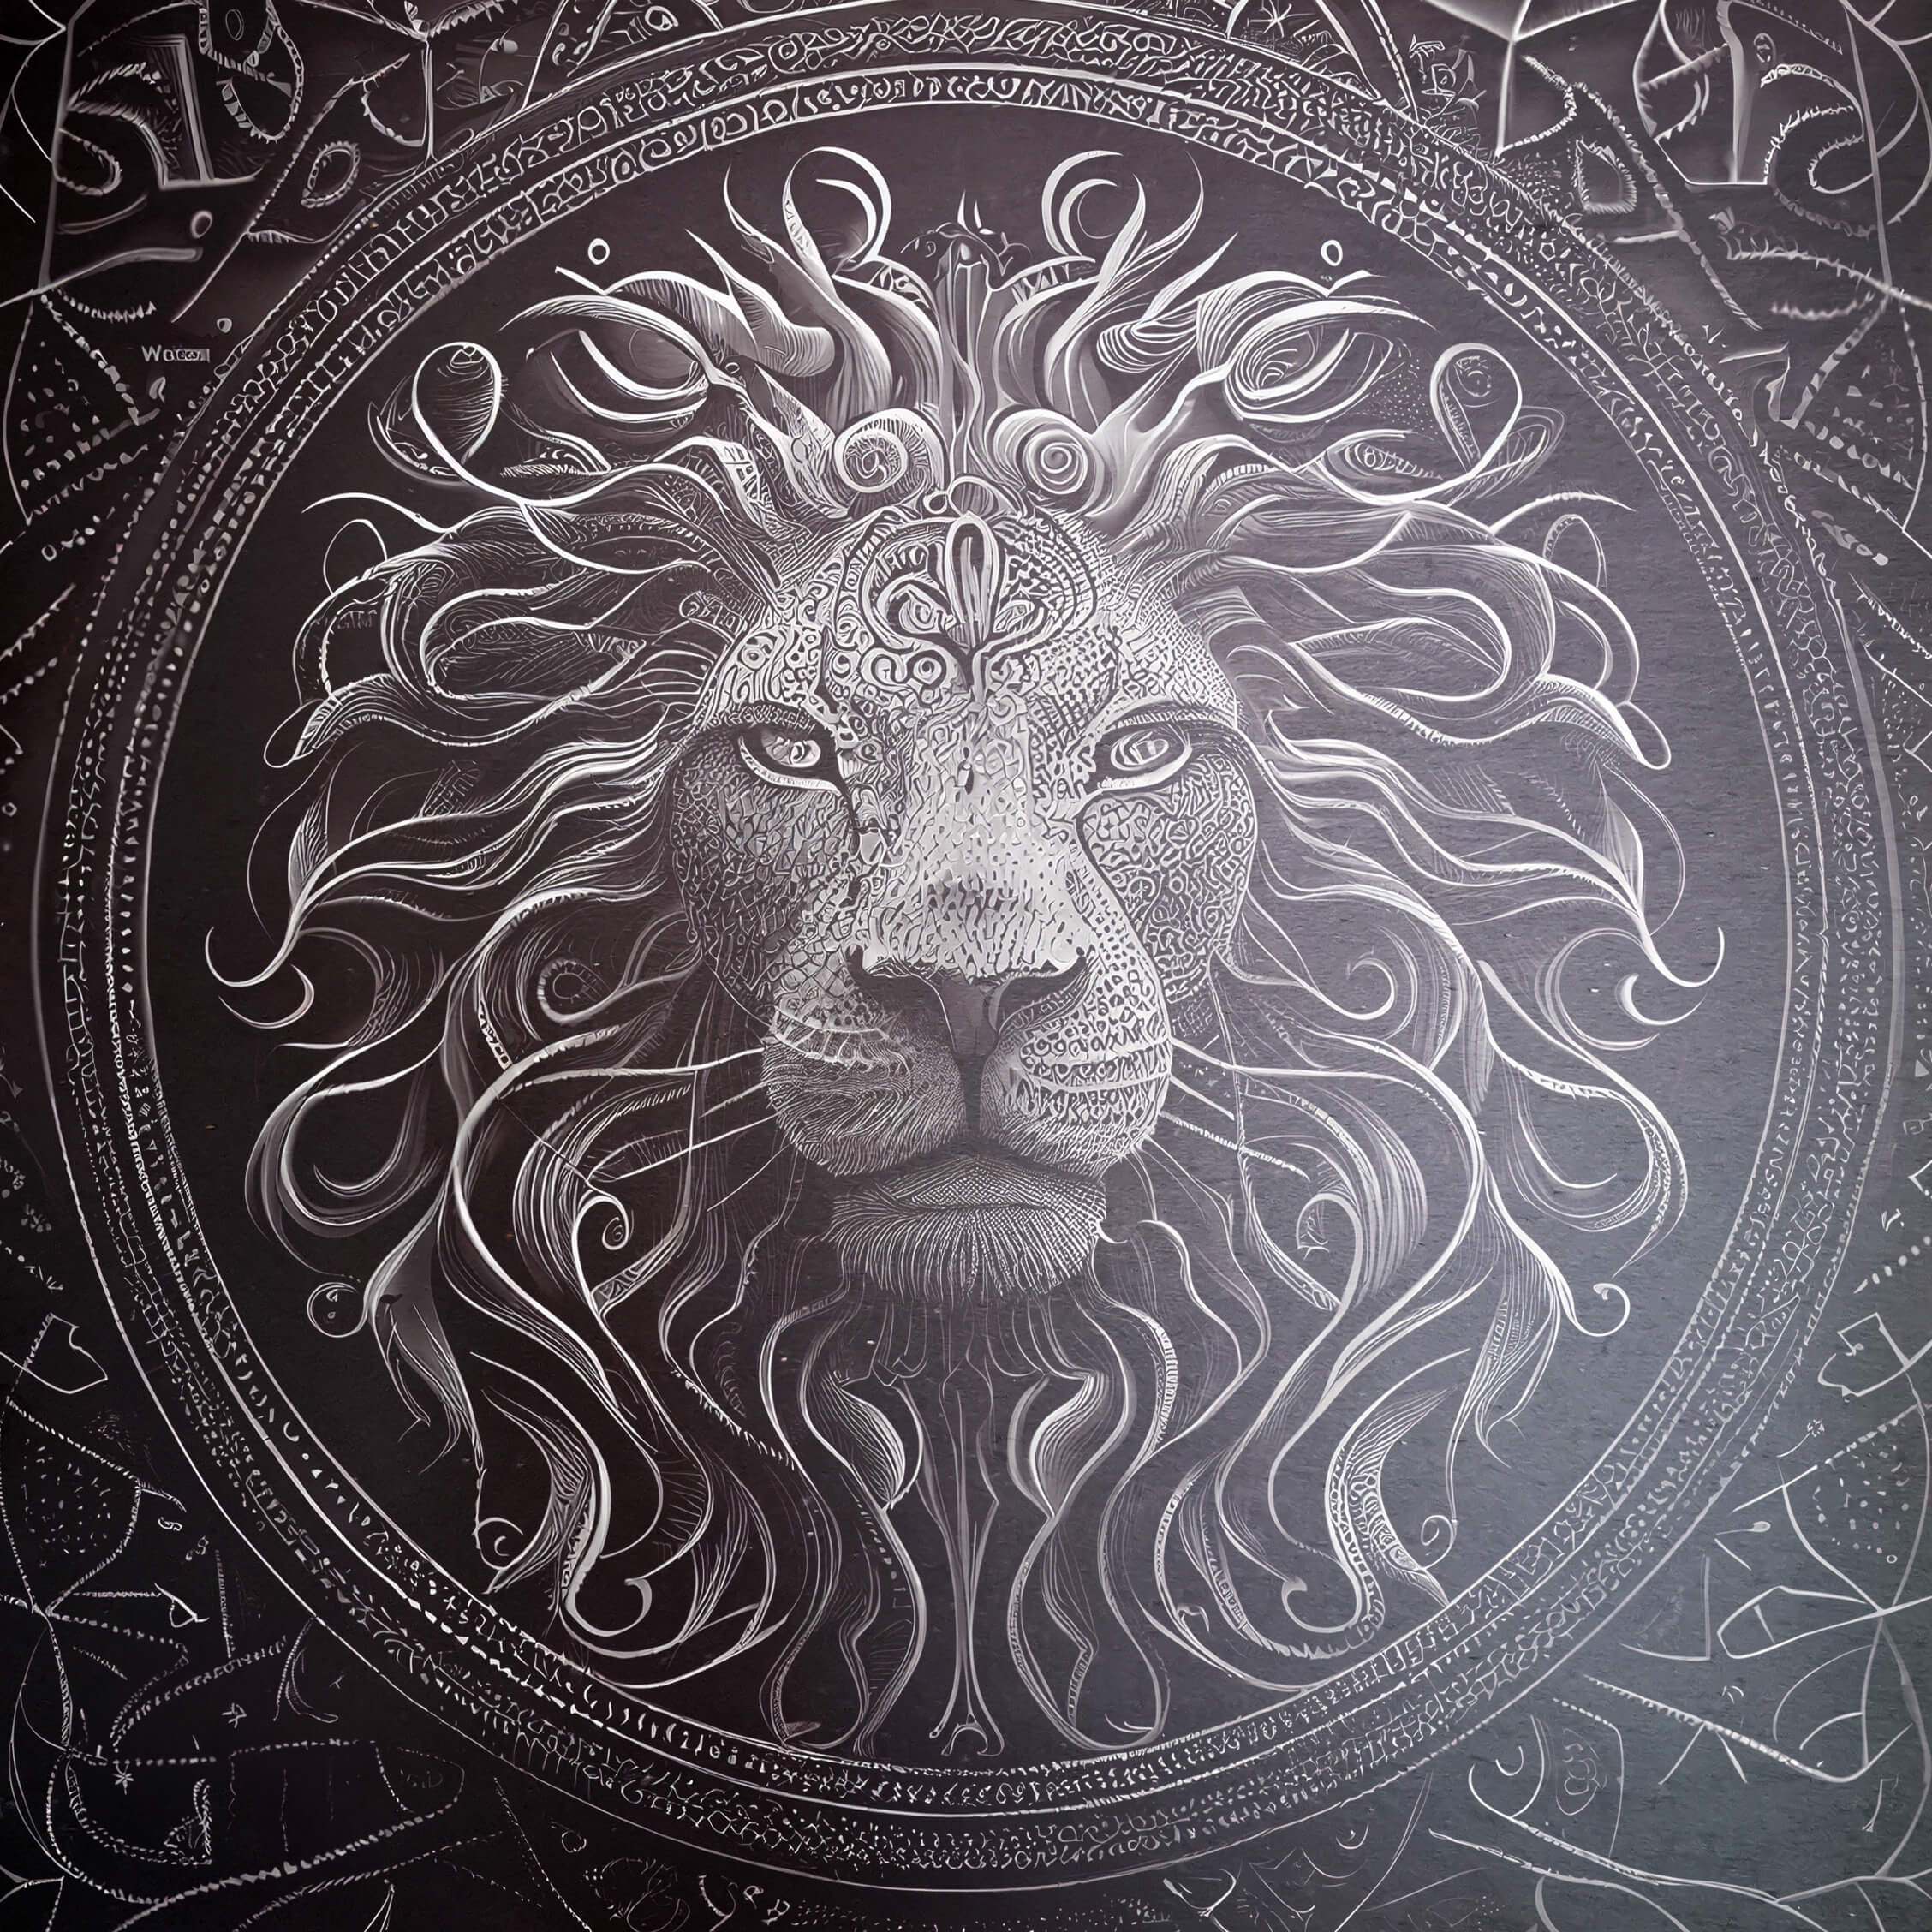 The Kingship of the Lion